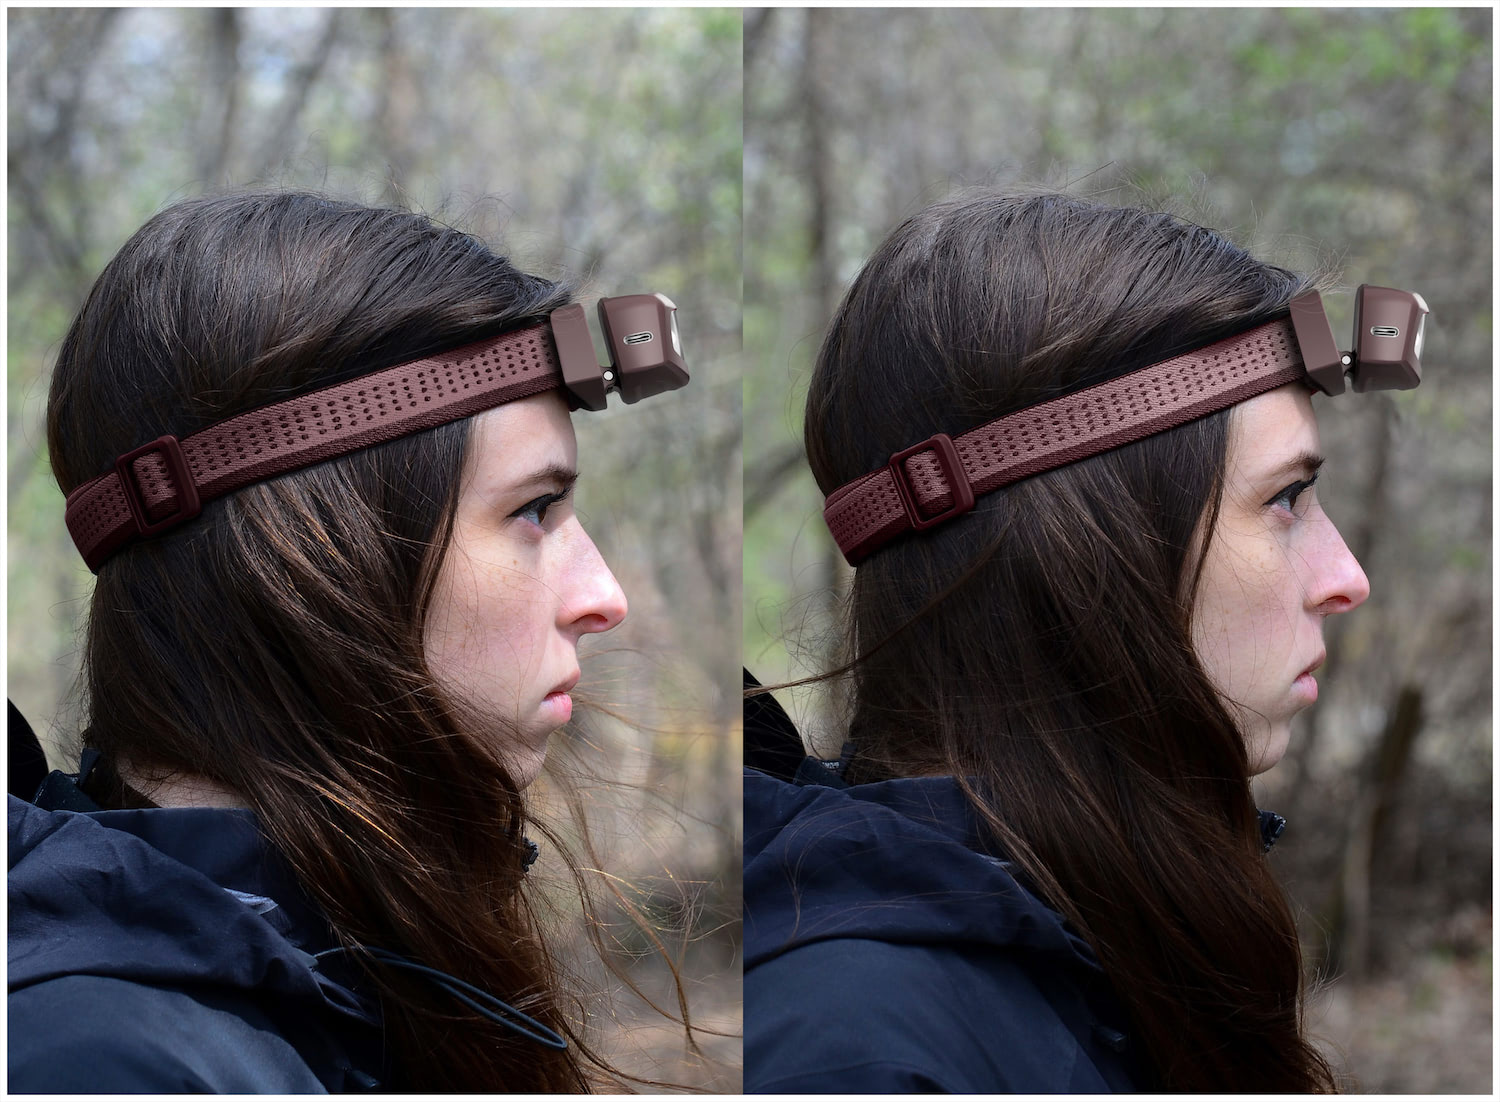 Alpinight headlamp in two positions on user's head.